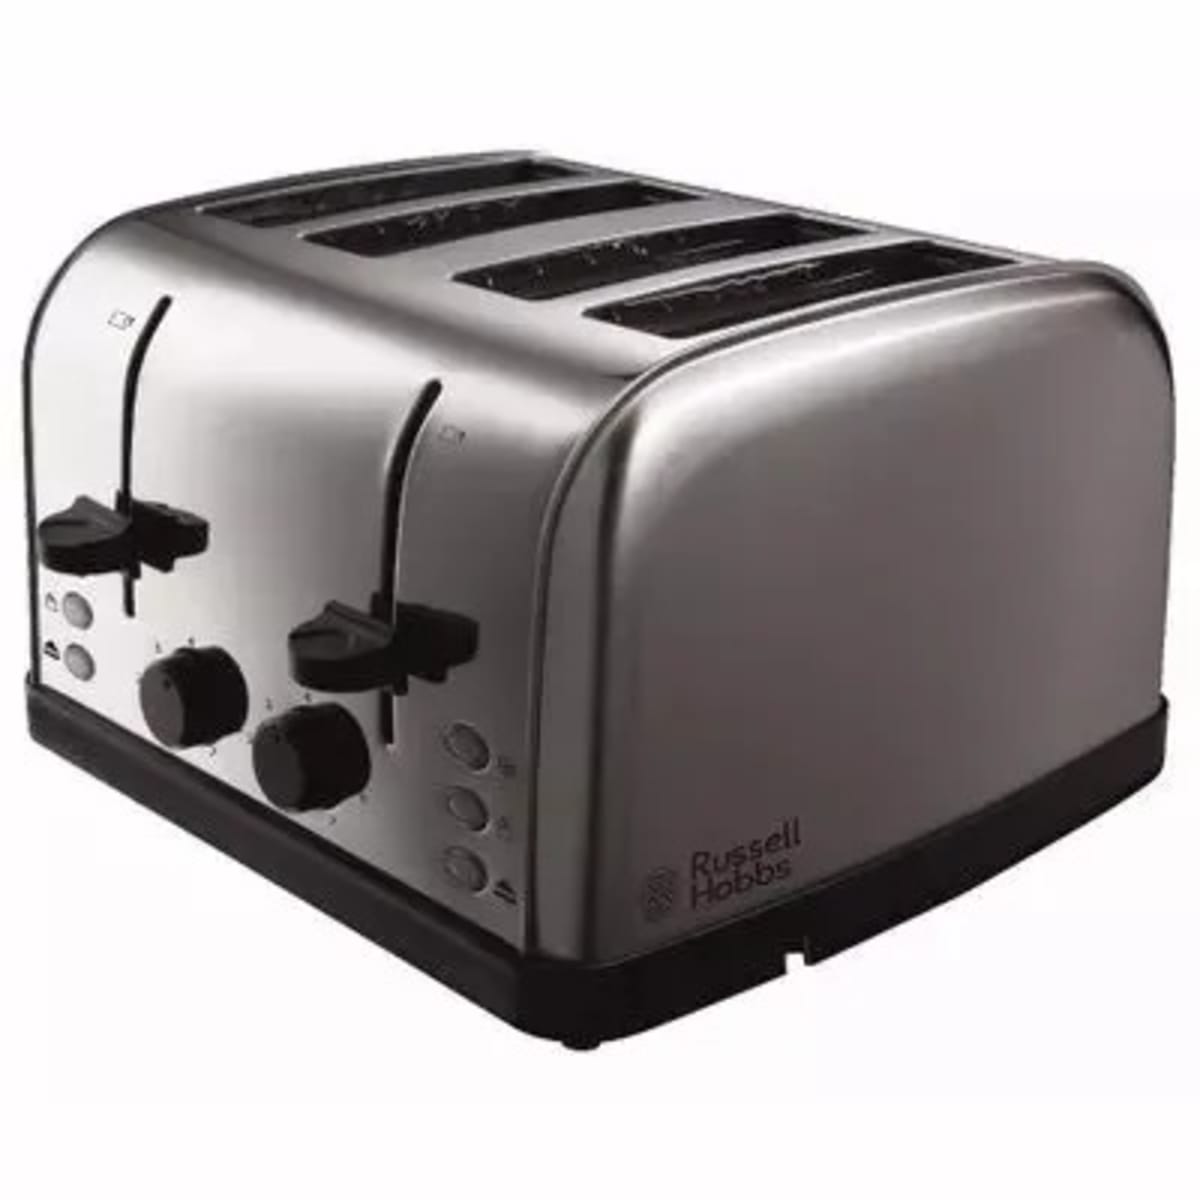 Buy Russell Hobbs 28100 Structure Toaster, 4 Slice - Contemporary